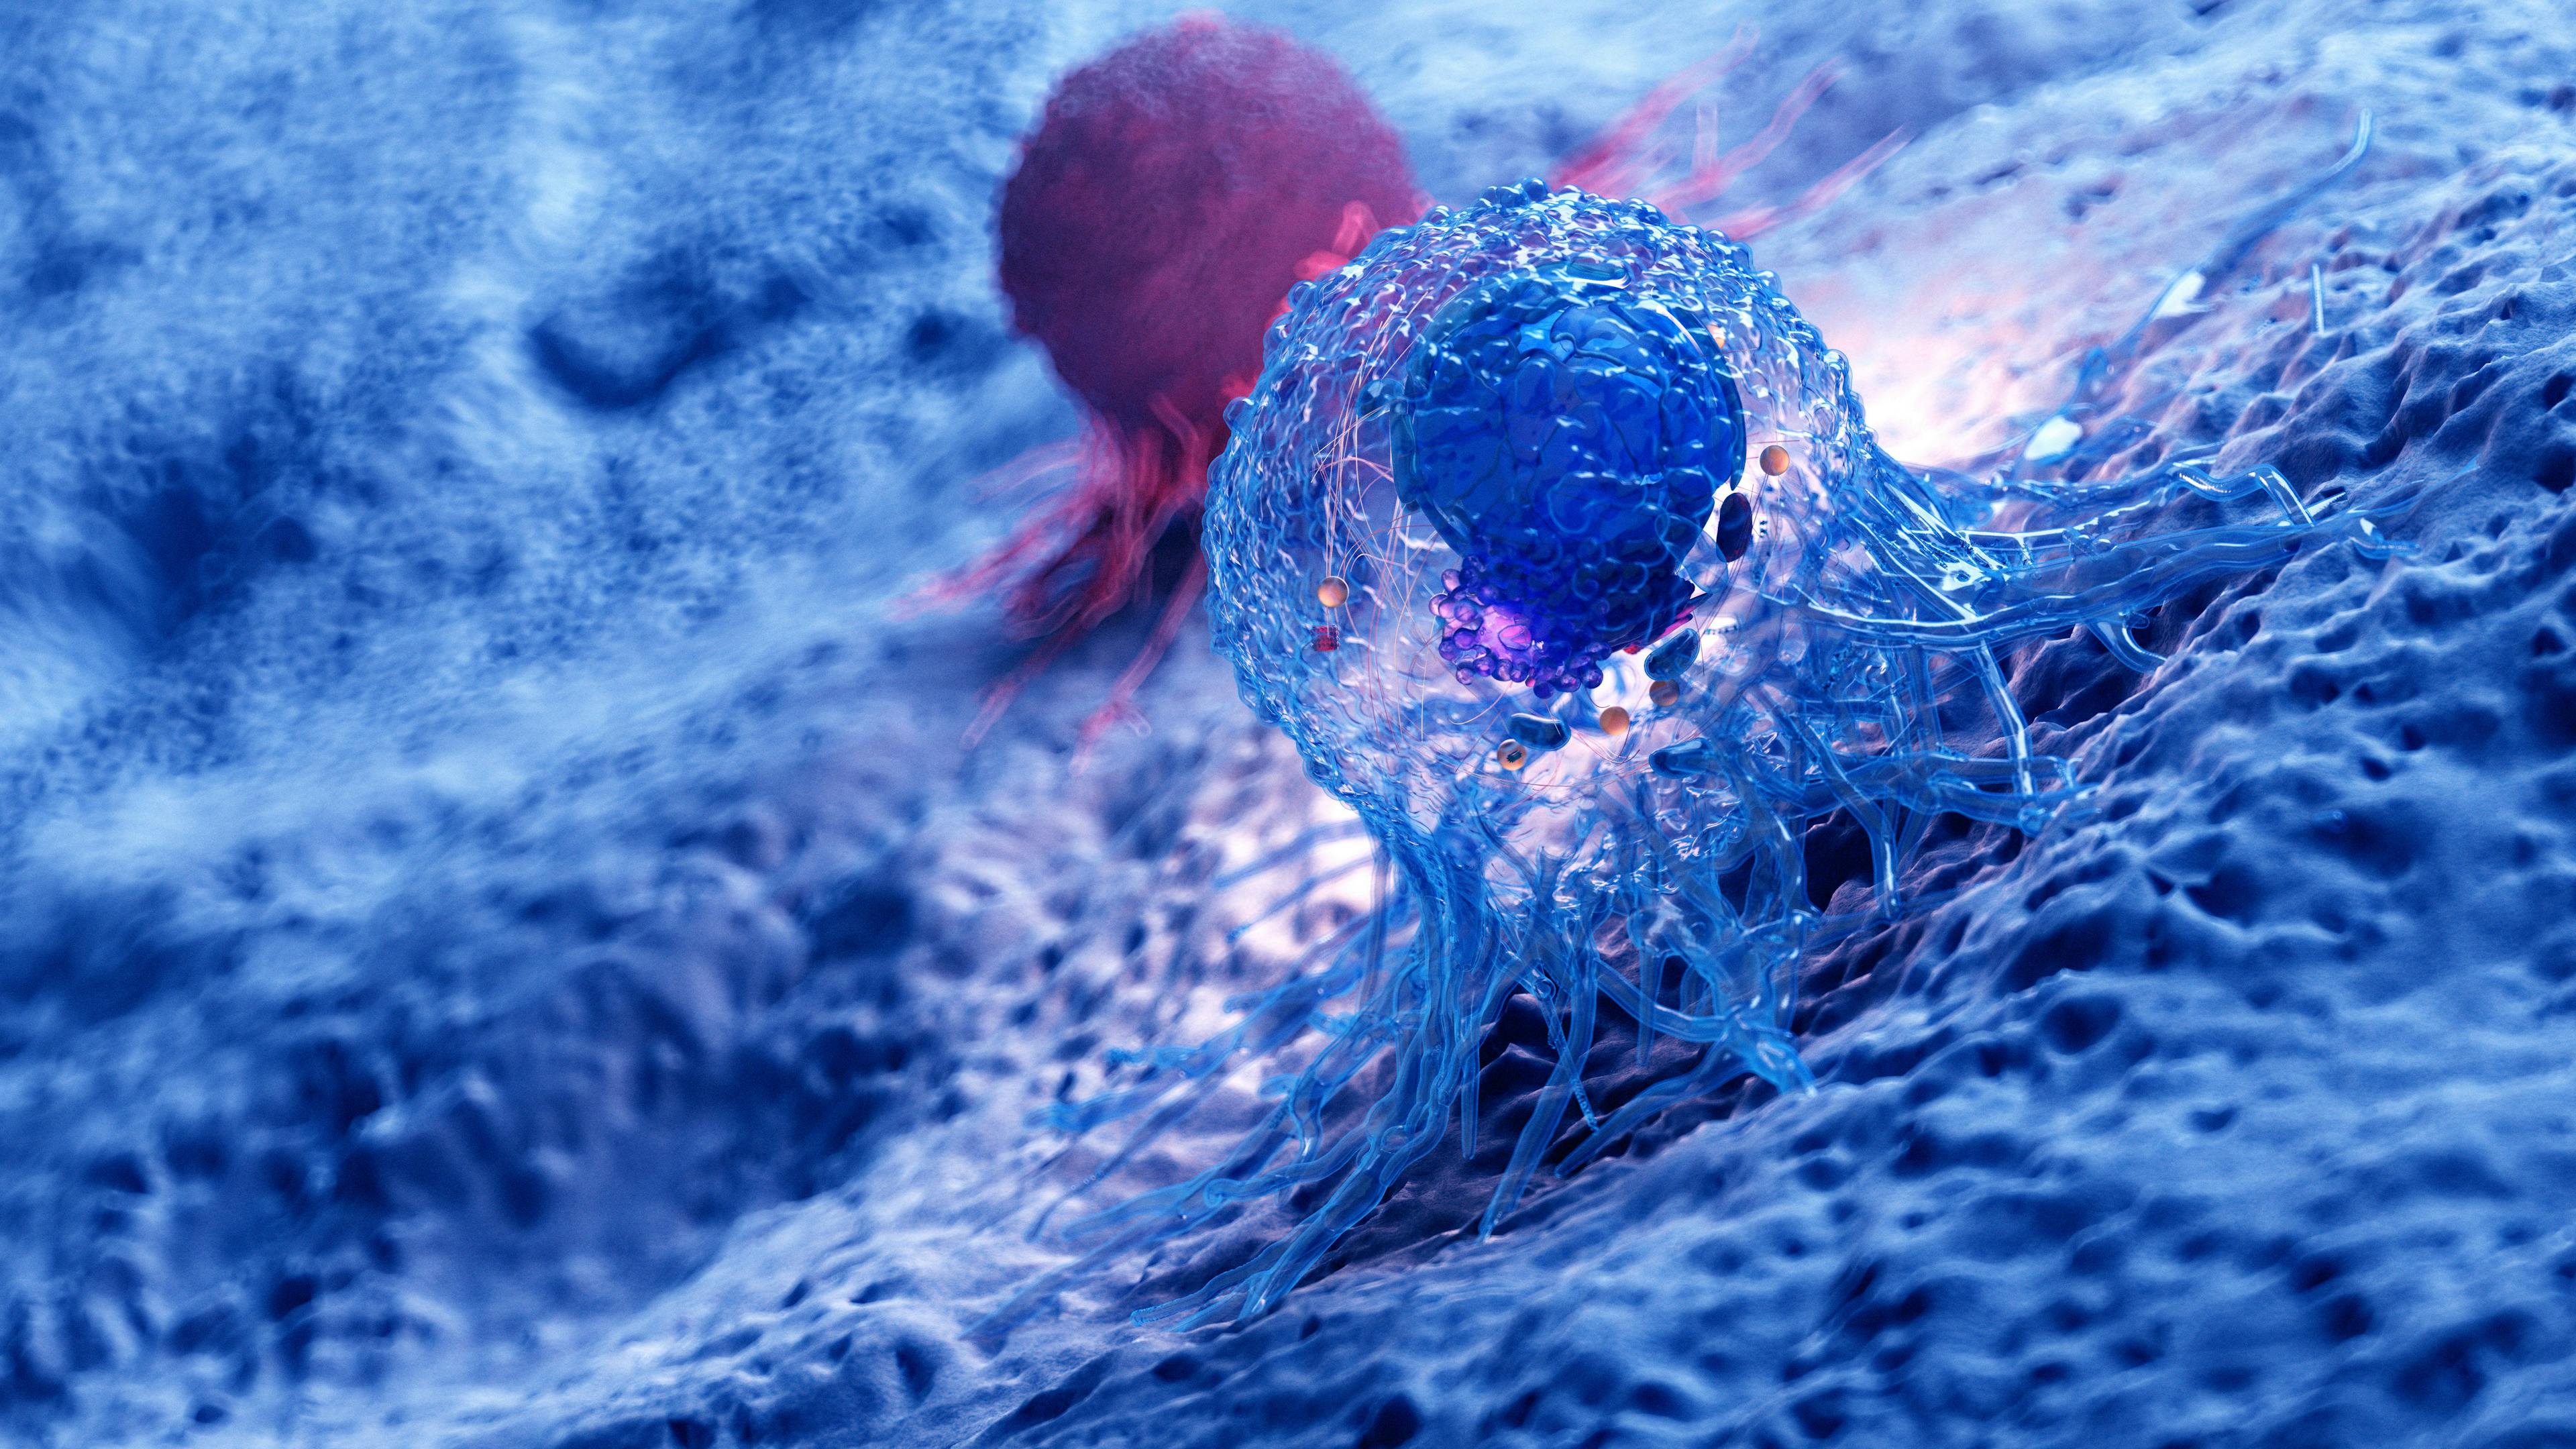 3d rendered illustration of the anatomy of a cancer cell - Image credit: SciePro | stock.adobe.com